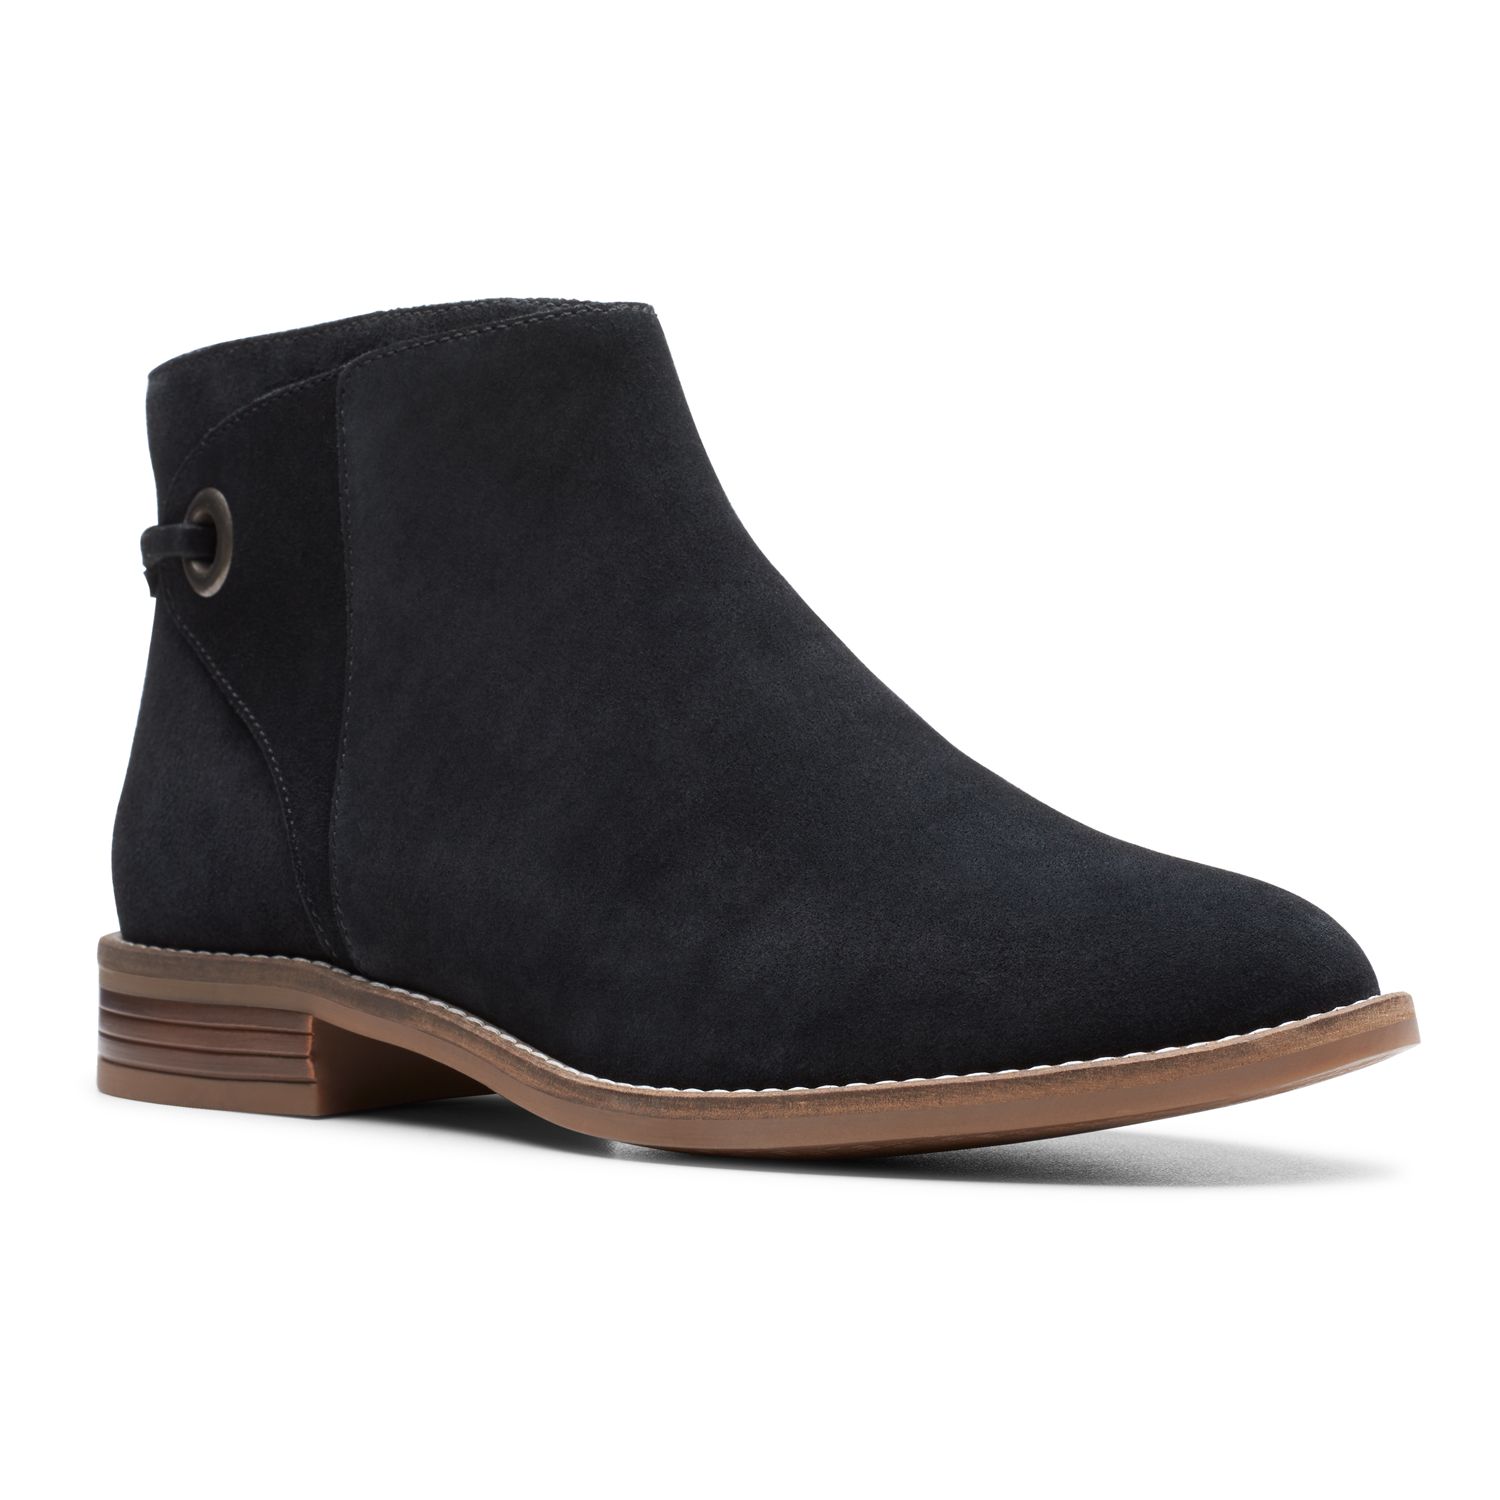 clark ankle boots